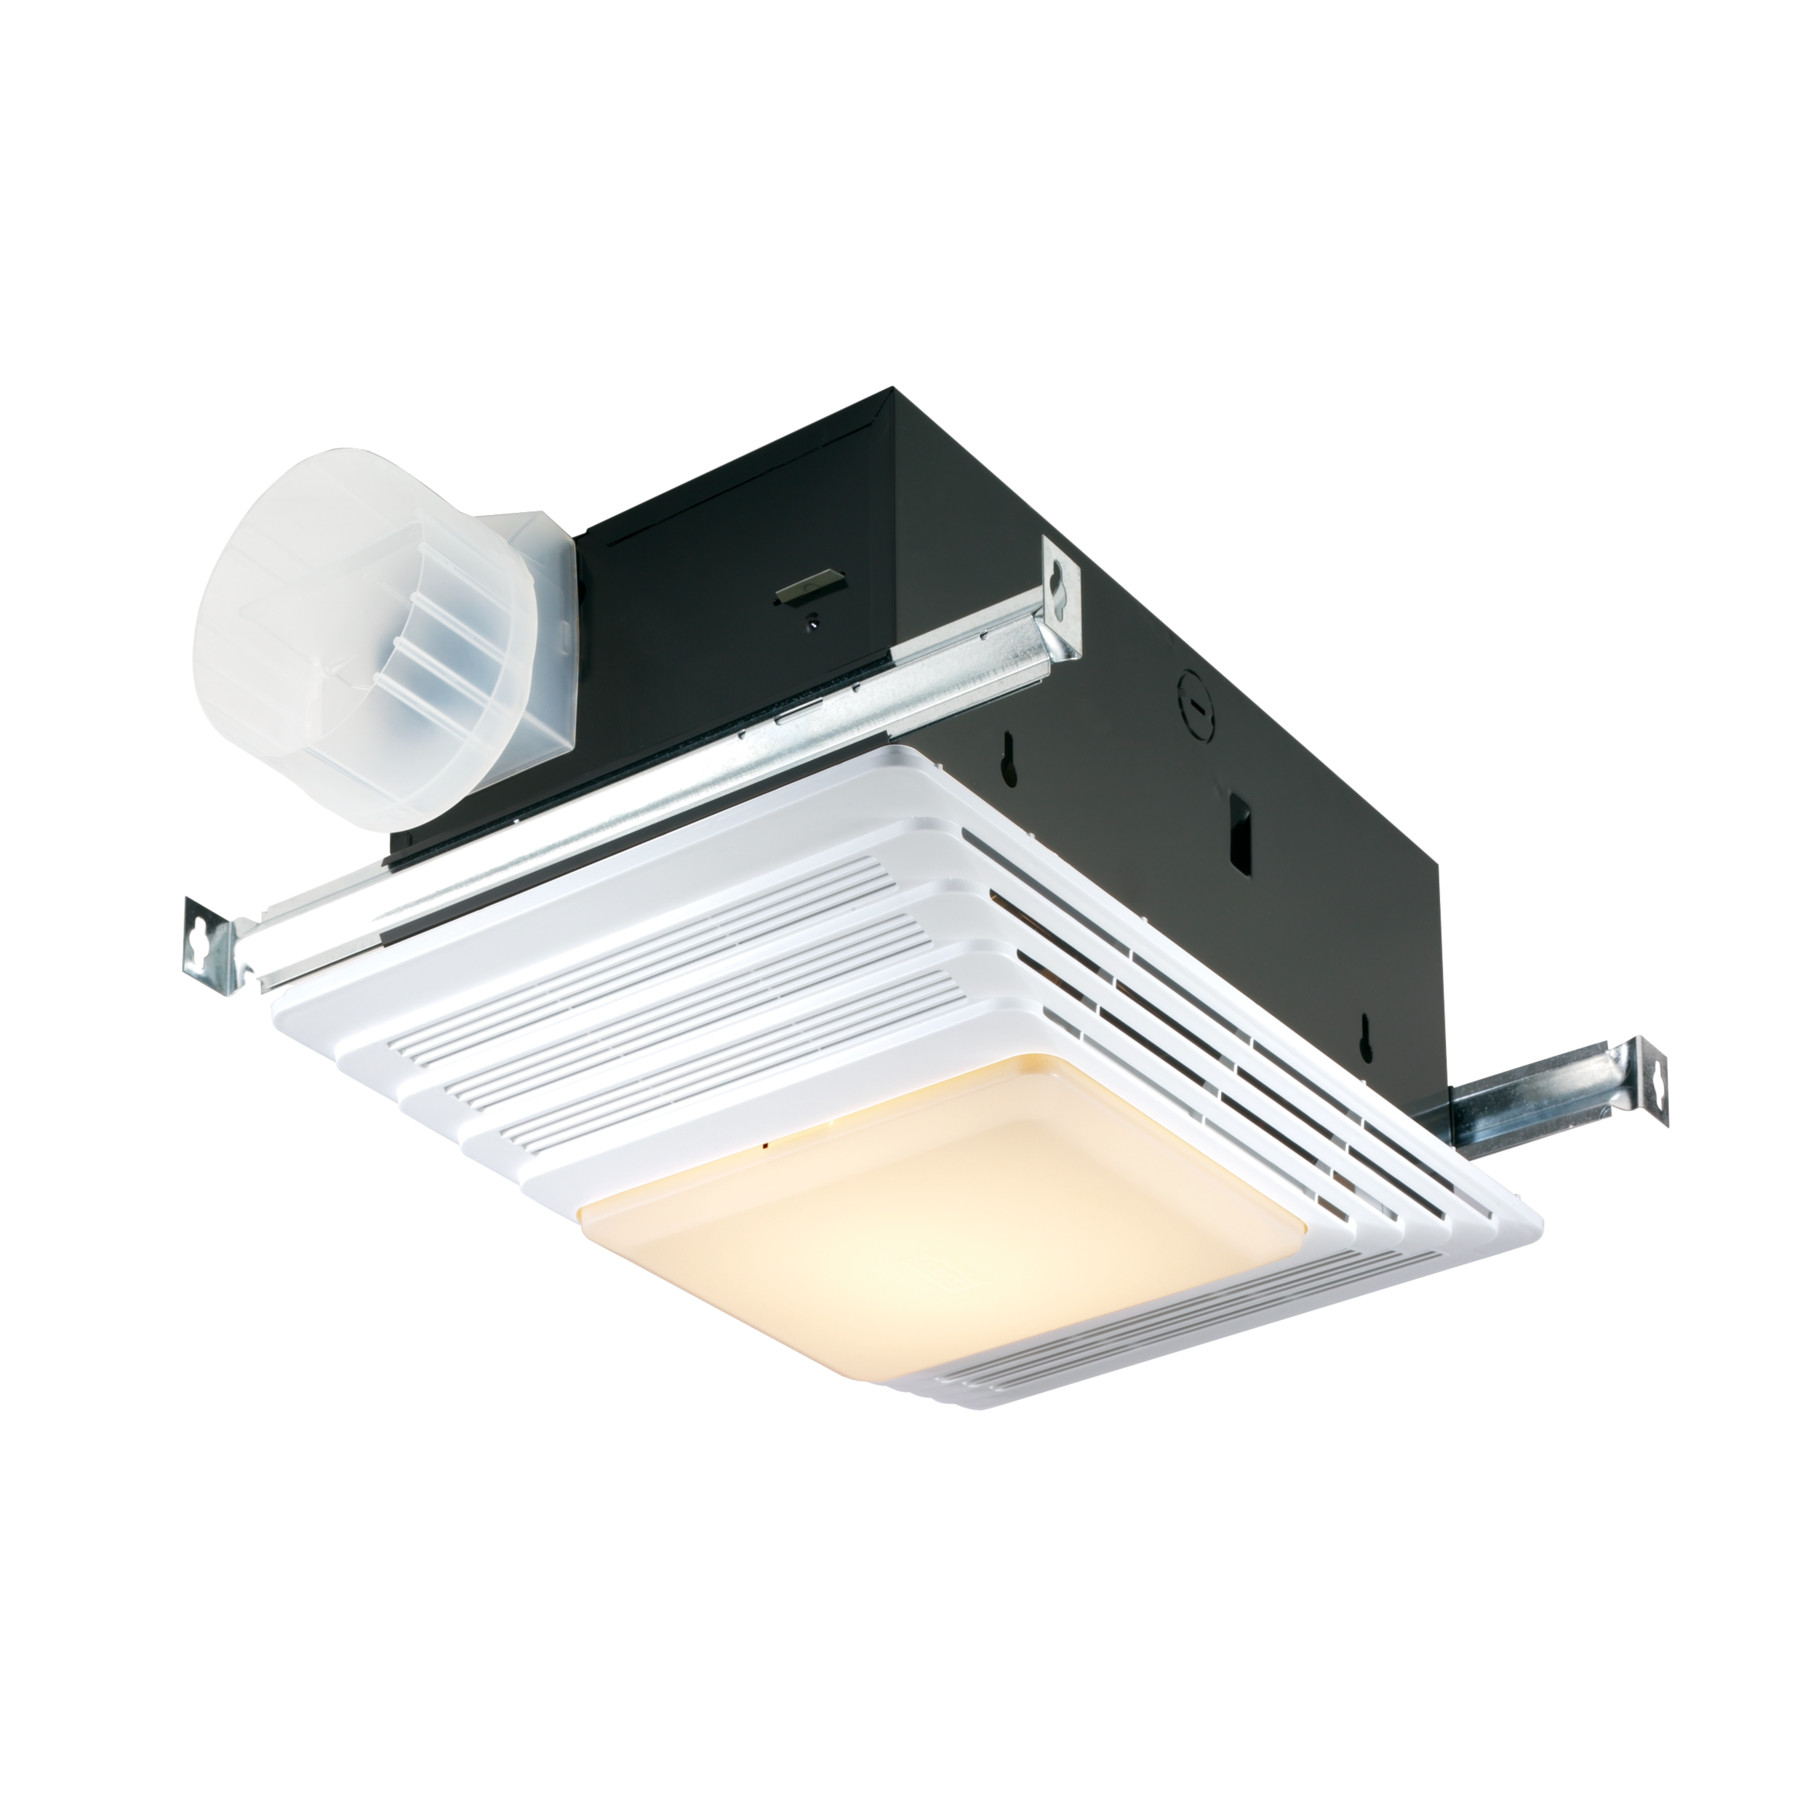 **DISCONTINUED** Broan® 70 CFM Ventilation Fan/Light with White Plastic Grille, 4.0 Sones